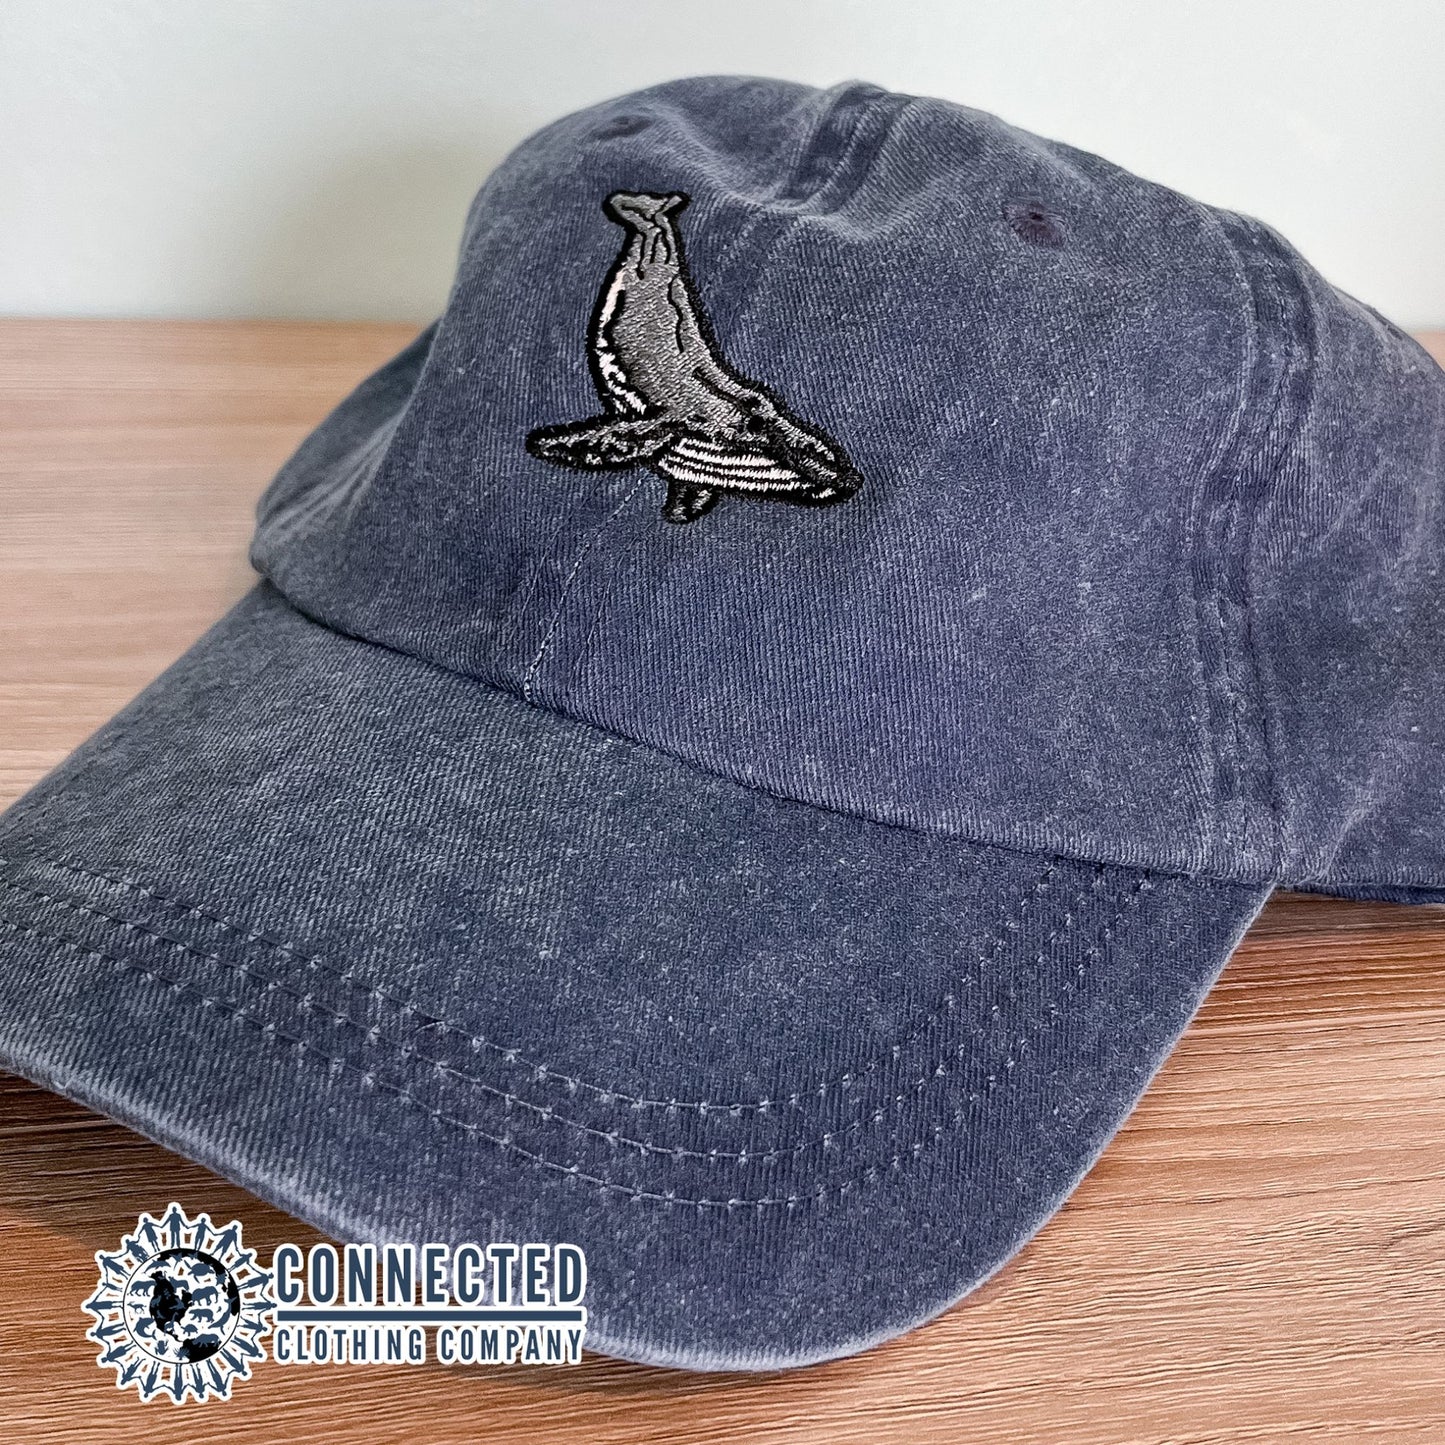 Humpback Whale Embroidered Hat - Connected Clothing Company - 10% of proceeds are donated to ocean conservation